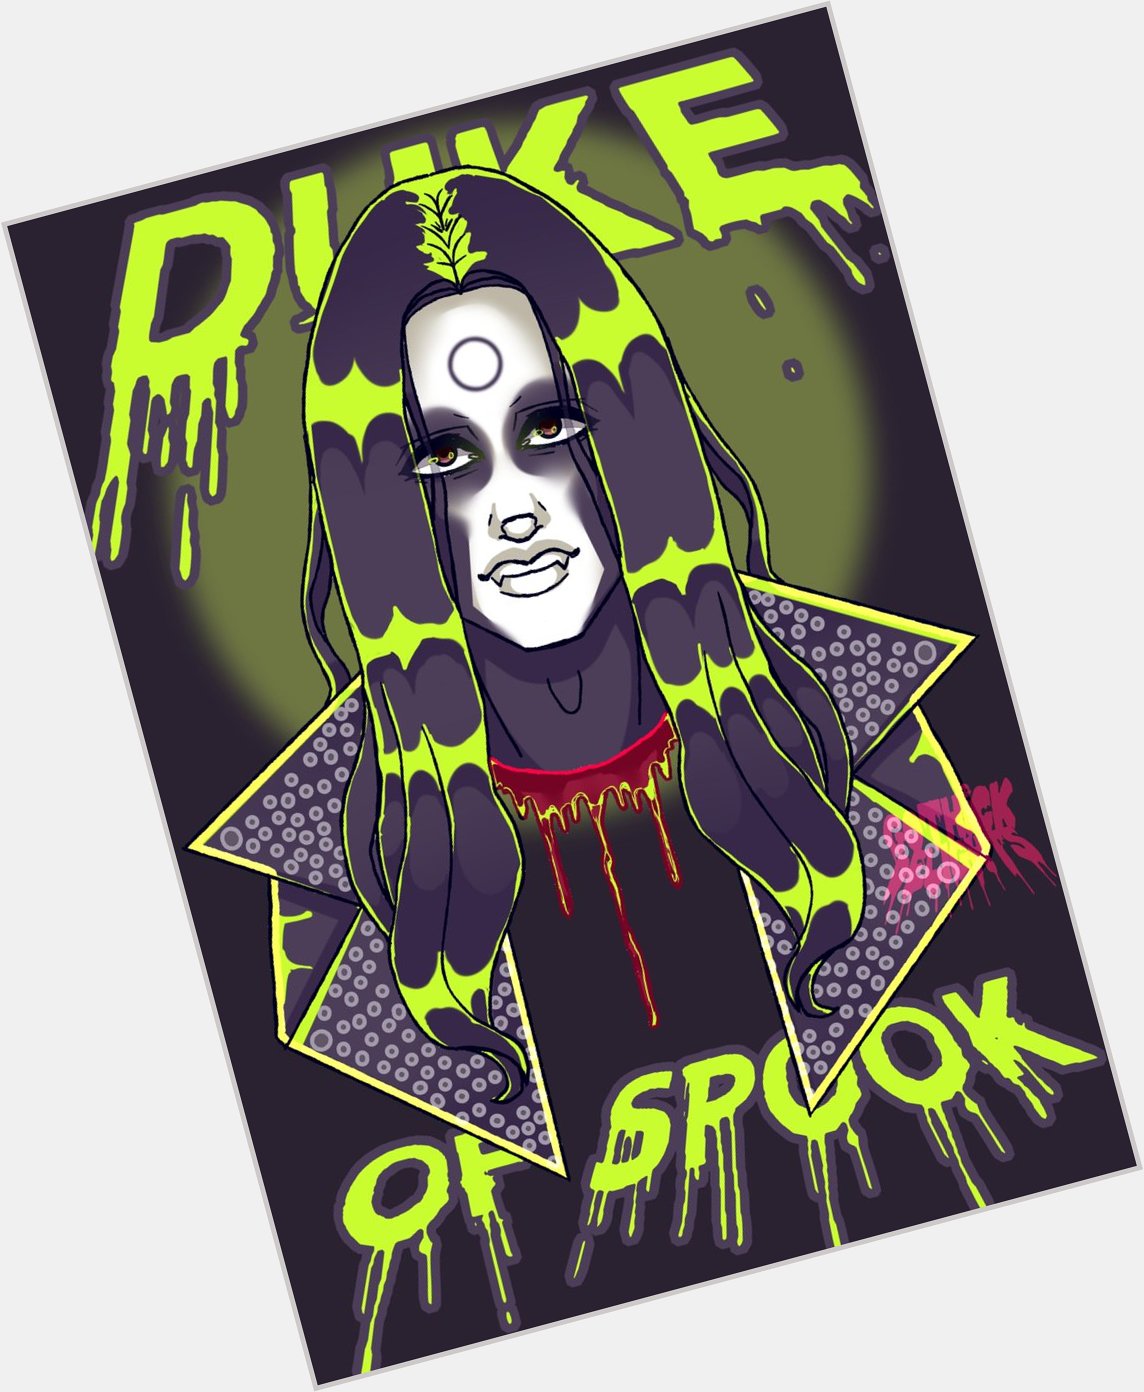 Happy Birthday to one of my favorite musicians and one of the coolest people, Wednesday 13 AKA: The Duke of Spook  